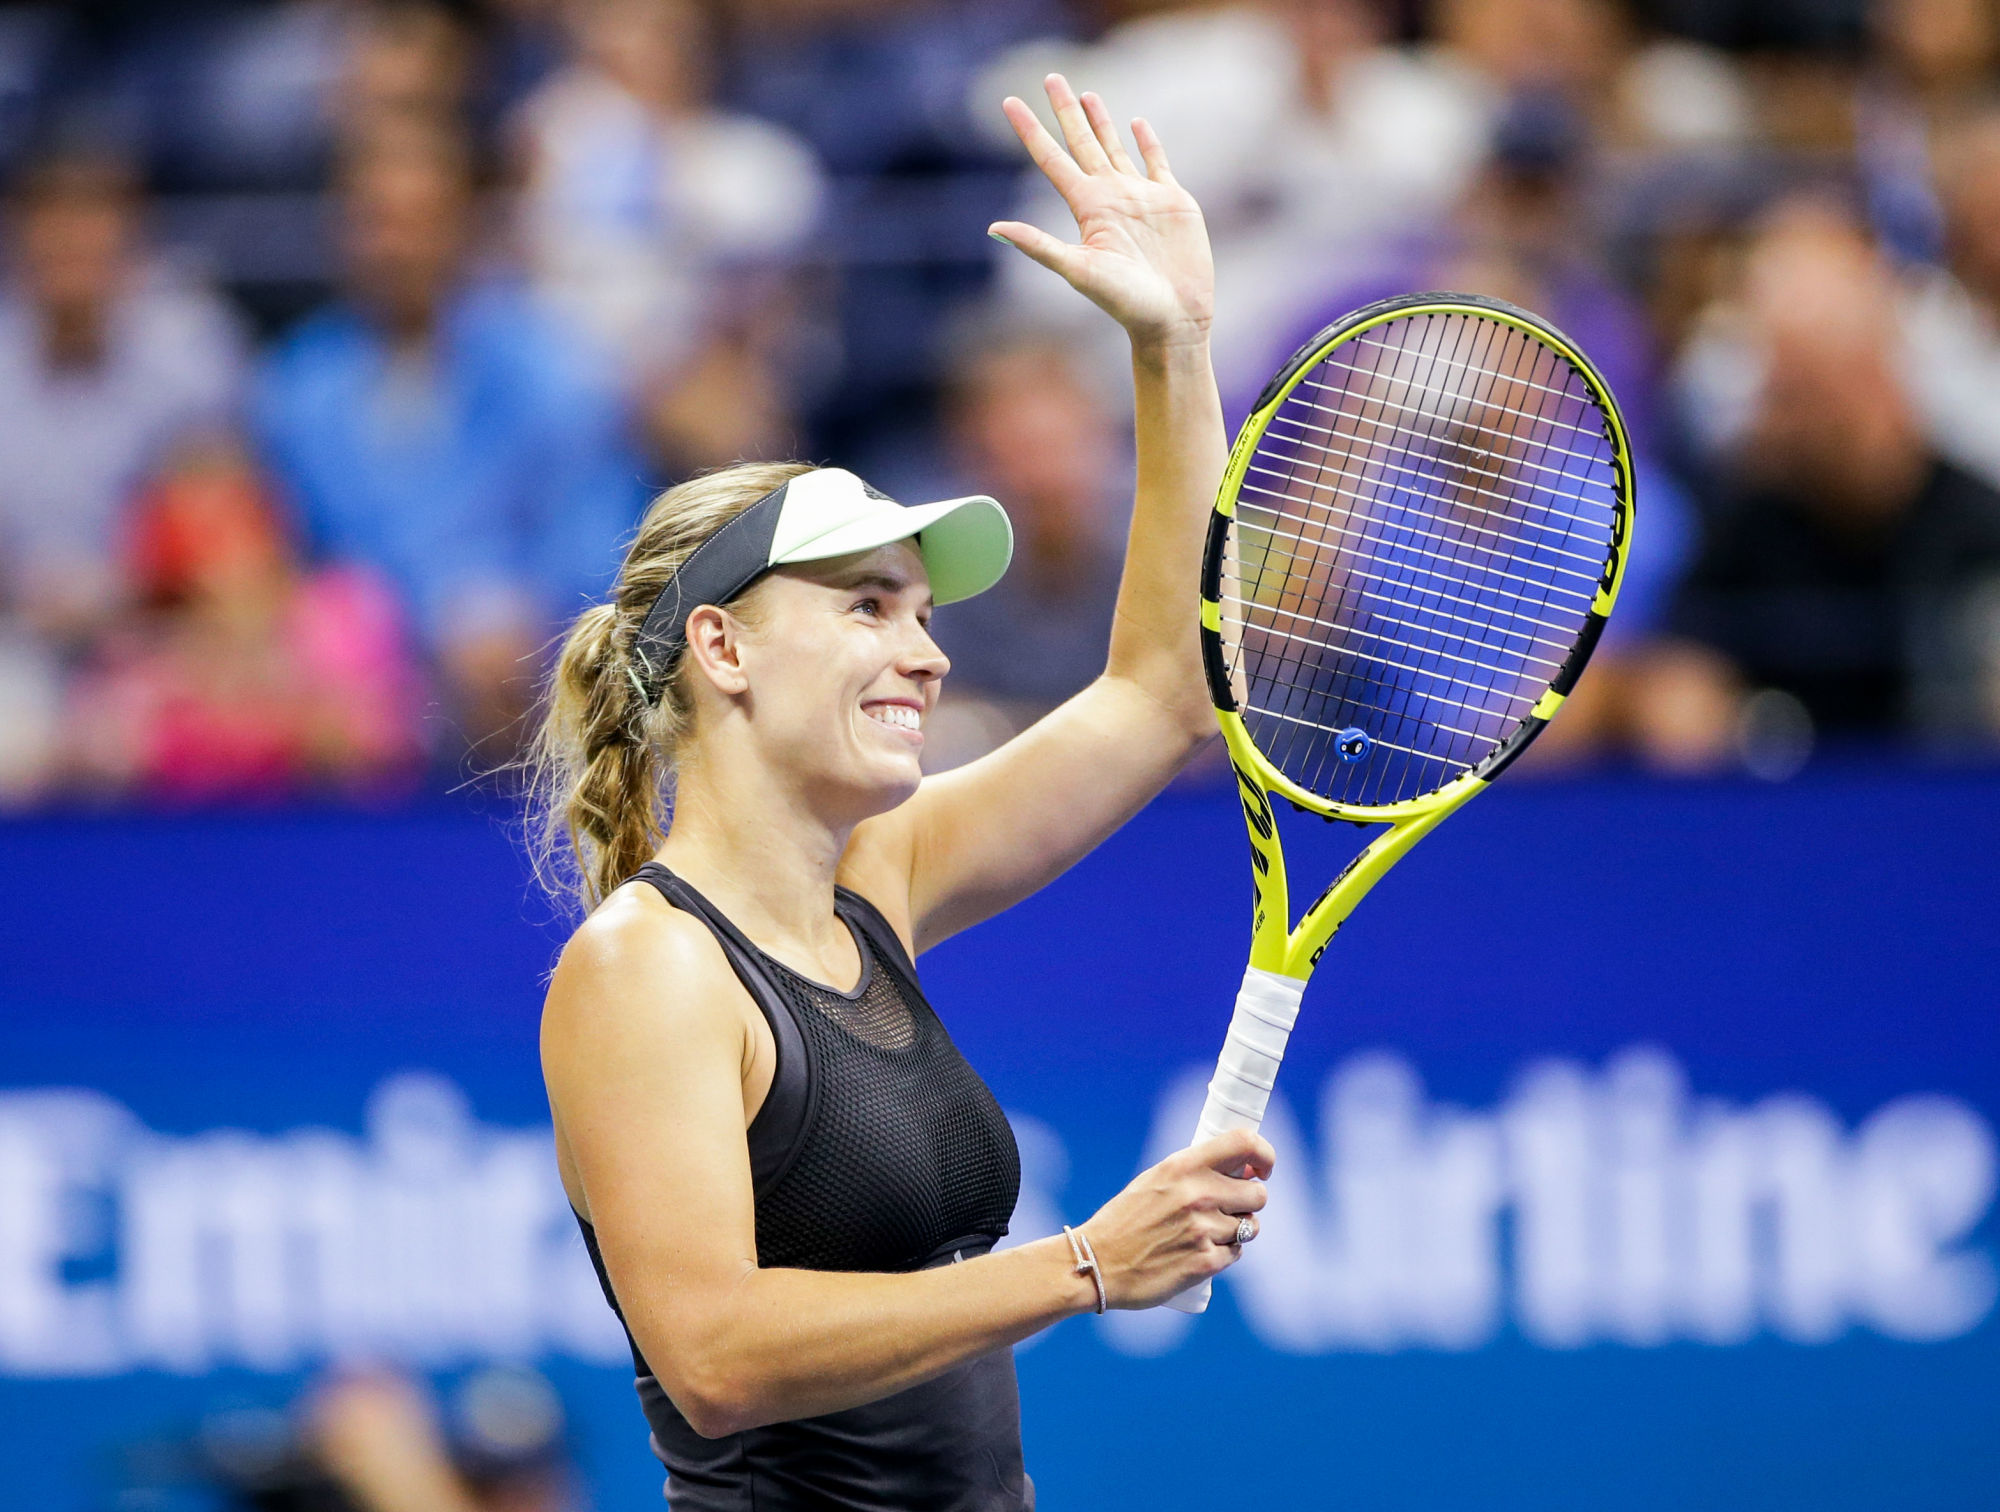 Aug 29, 2019; Flushing, NY, USA; Caroline Wozniacki of Denmark celebrates match point against Danielle Collins of the United States in a second round match on day four of the 2019 U.S. Open tennis tournament at USTA Billie Jean King National Tennis Center. Photo : SUSA / Icon Sport